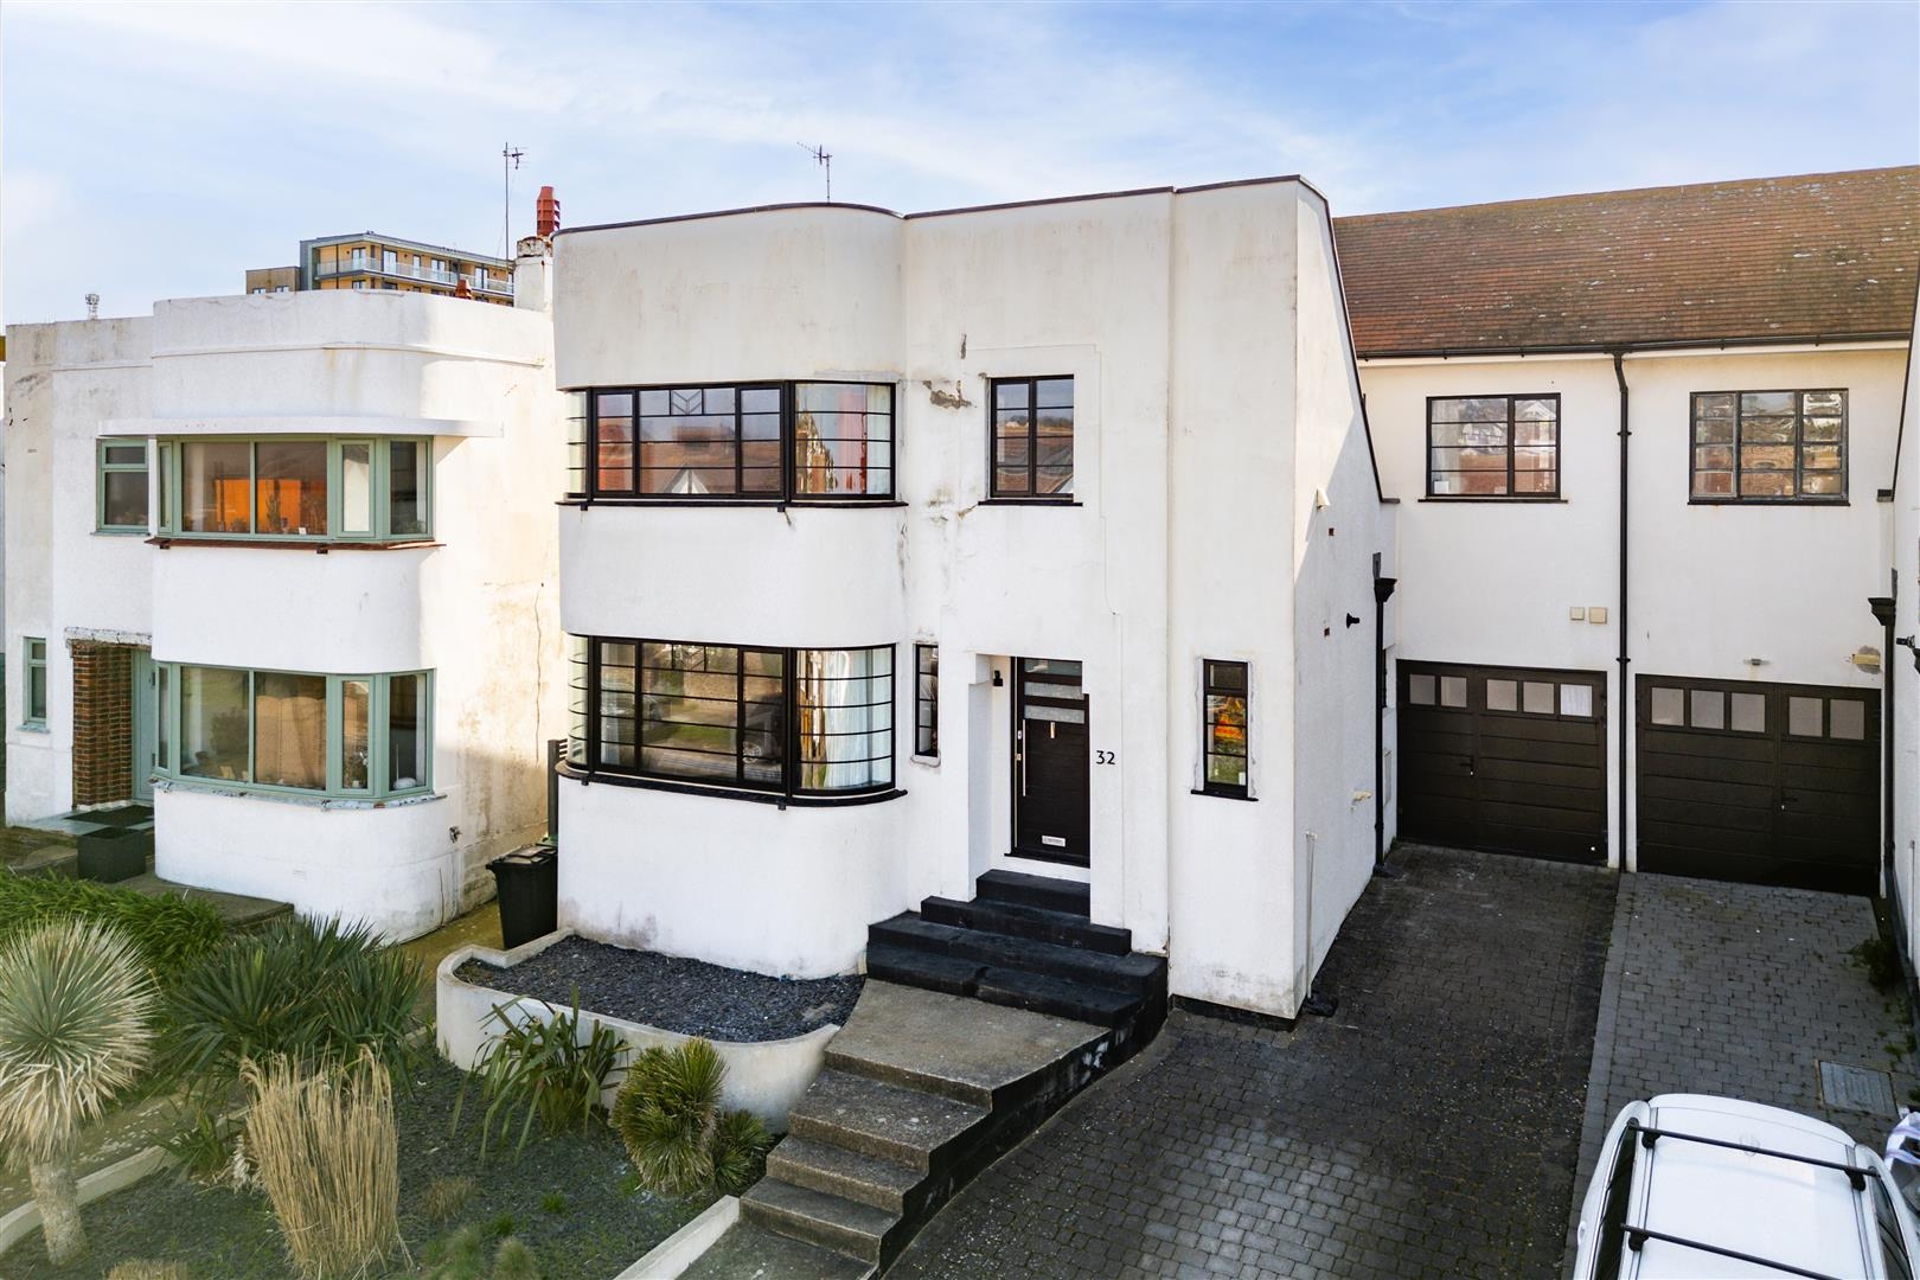 'I made an offer the first time I saw it': inside an East Sussex Art Deco masterpiece on the market for £1m